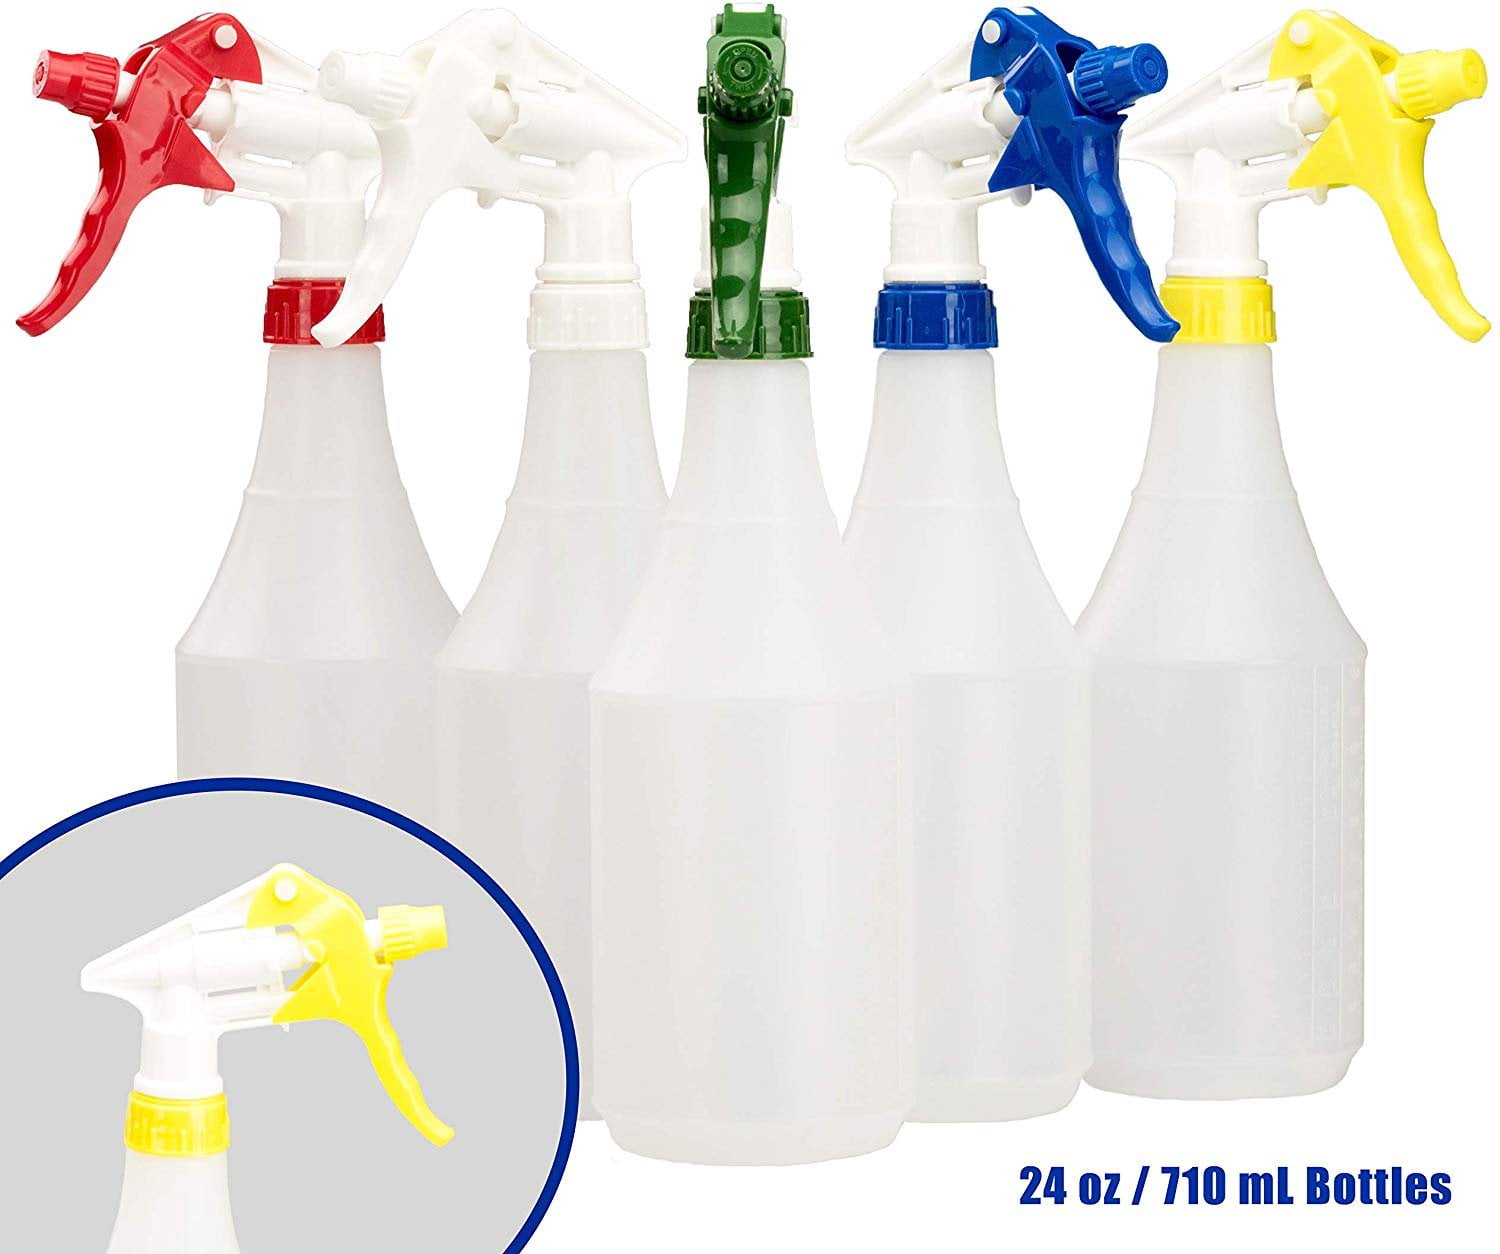 Commercial-Grade Chemical Resistant 24 oz Bottles 12 Pack By Mop Mob Janitorial Cleaning Supply or Lawn Care Pair With Industrial Spray Heads For Auto/Car Detailing Embossed Scale For Measuring 